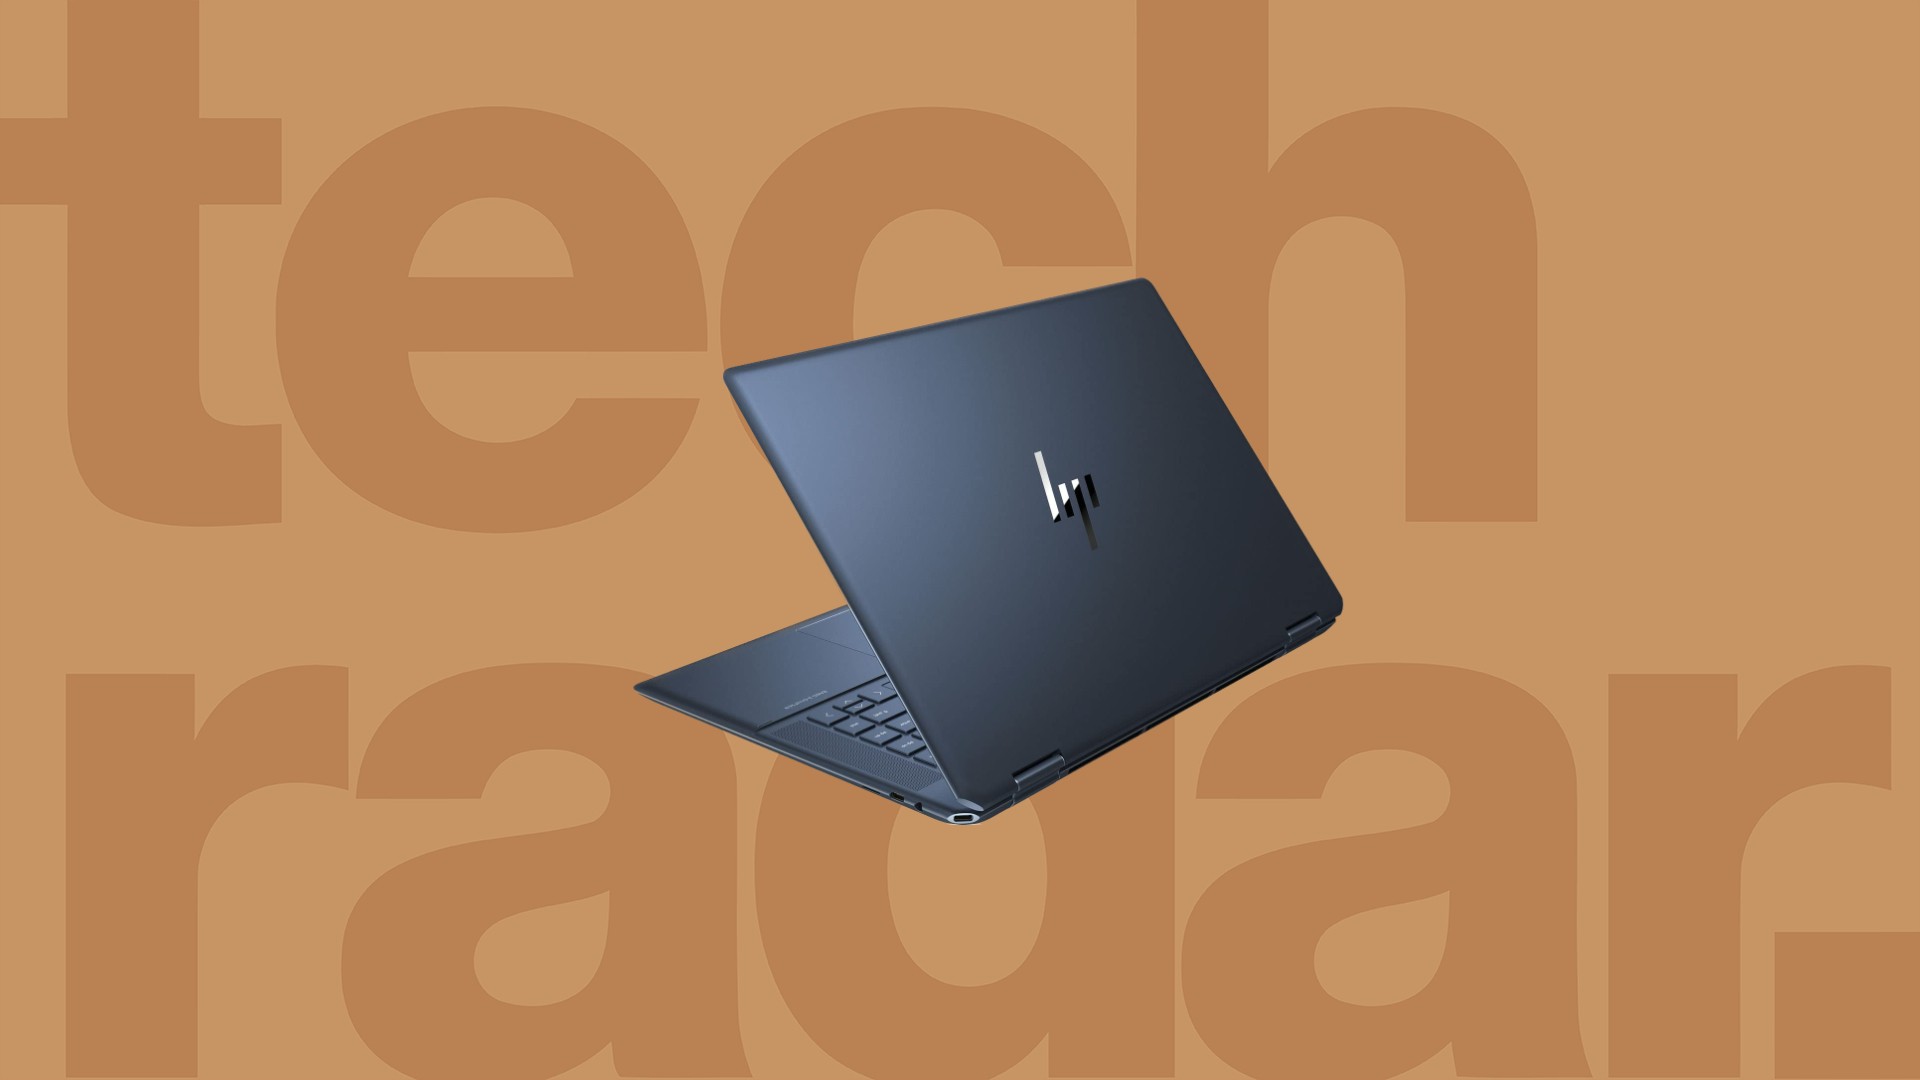 13-inch or 15-inch: How to choose the right laptop size for you